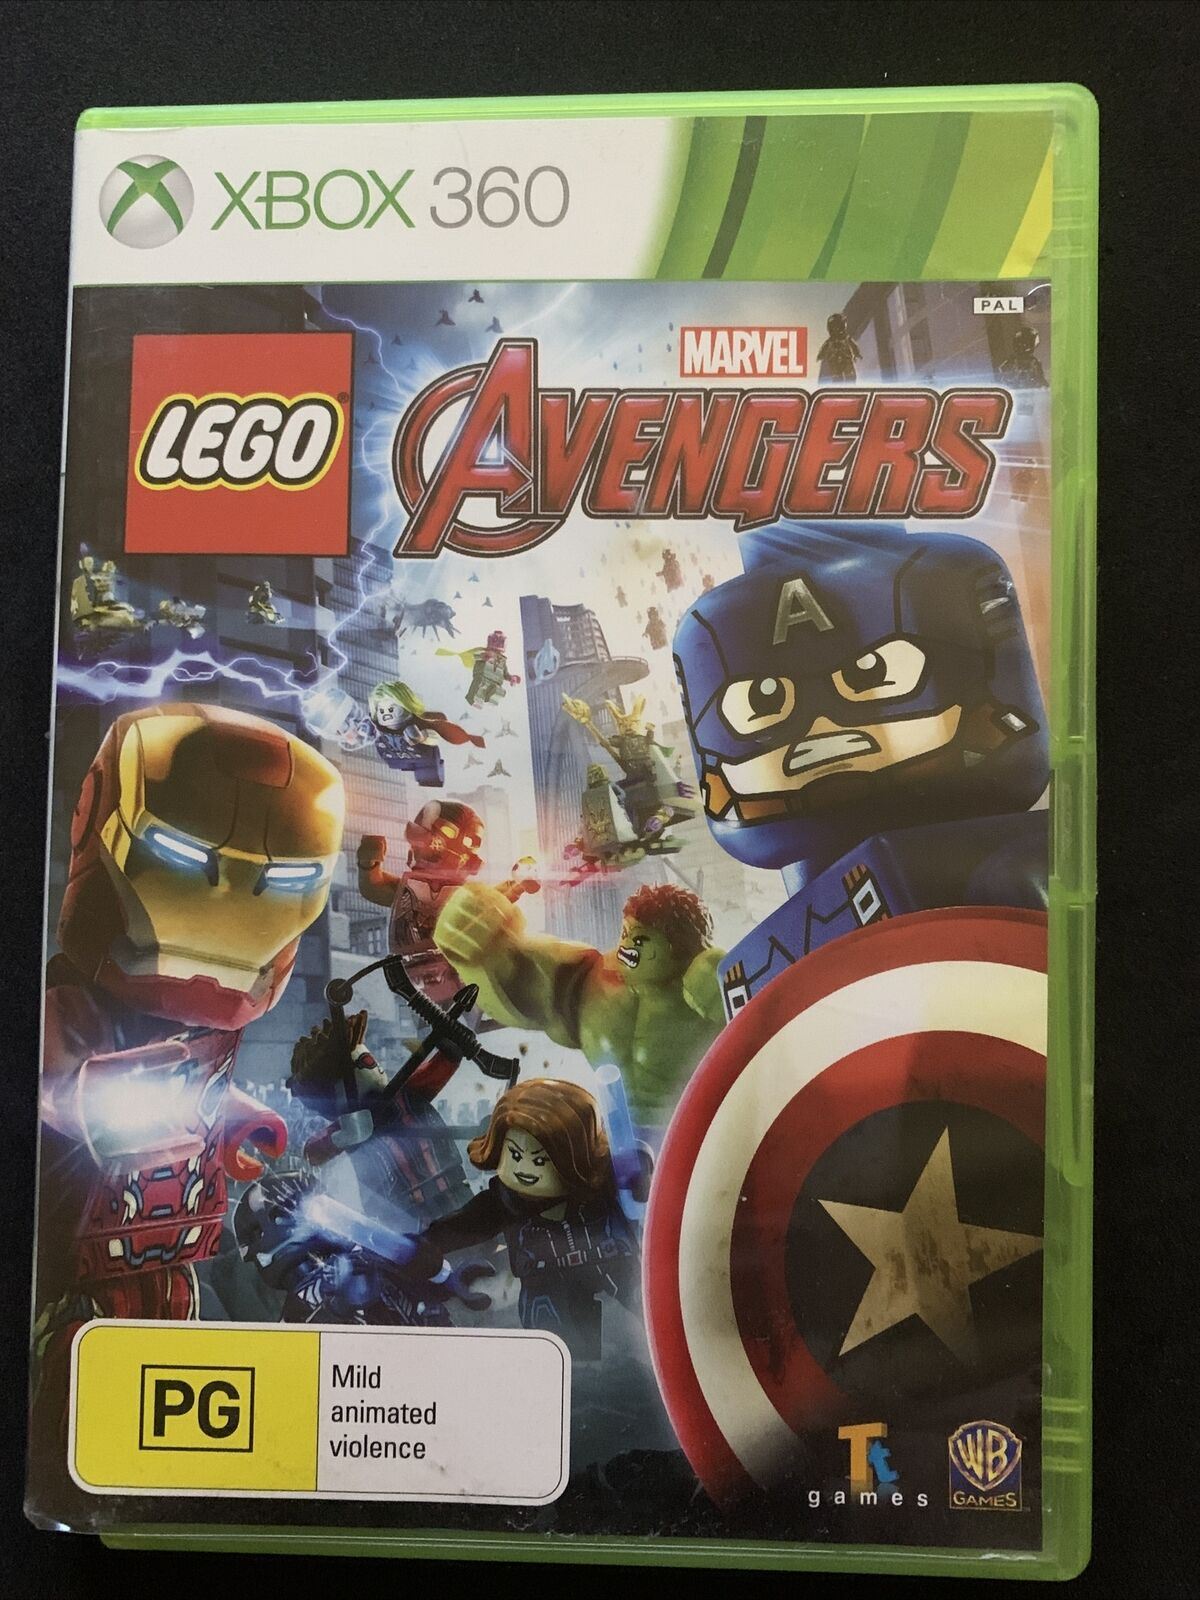 LEGO Marvel Avengers - Xbox 360 Game - Australian PAL Version with Manual